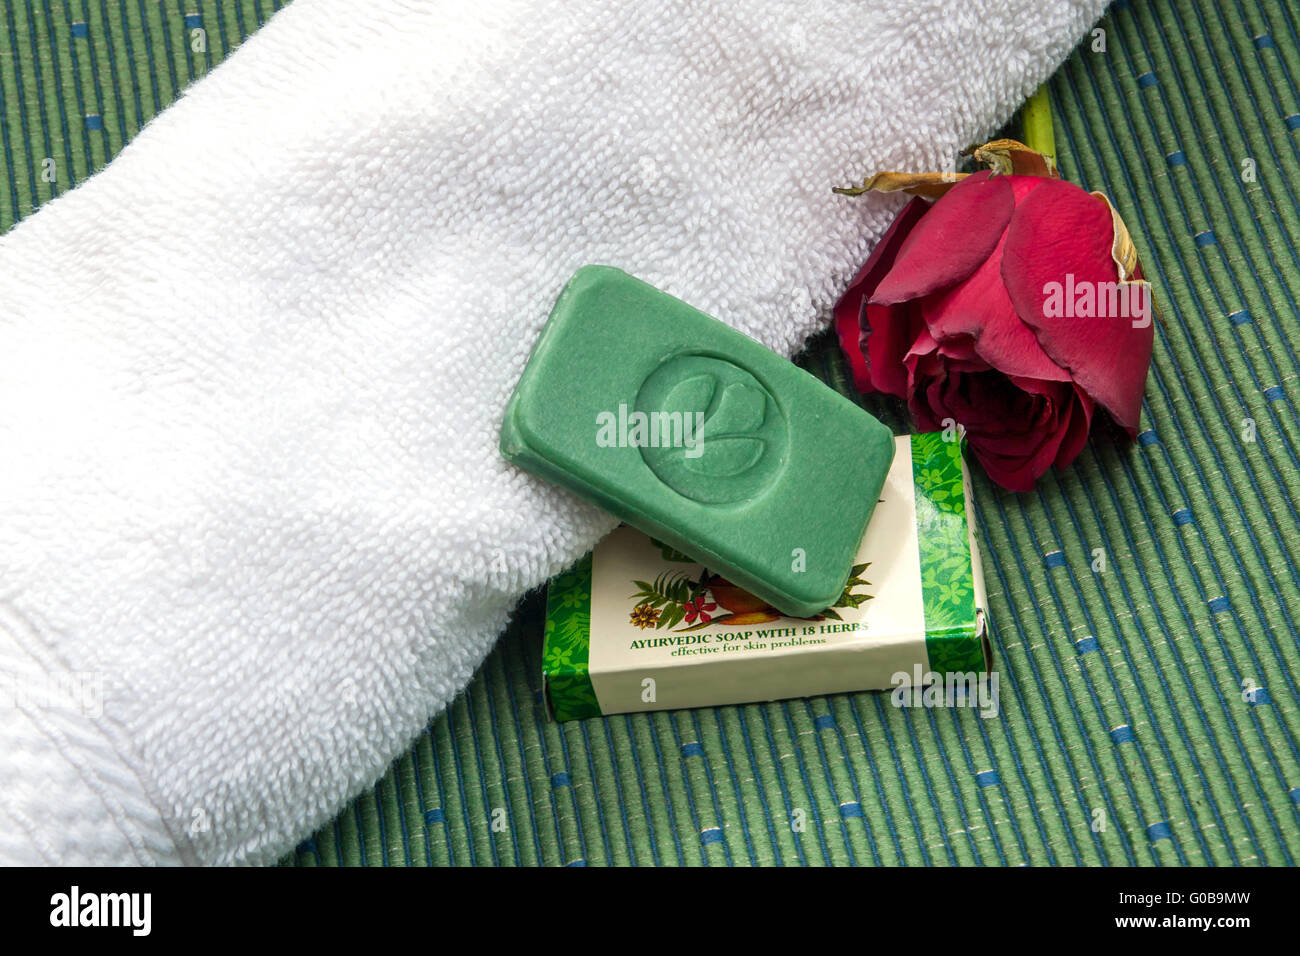 Stilllife with ayurvedic herbal soap with cachet G Stock Photo